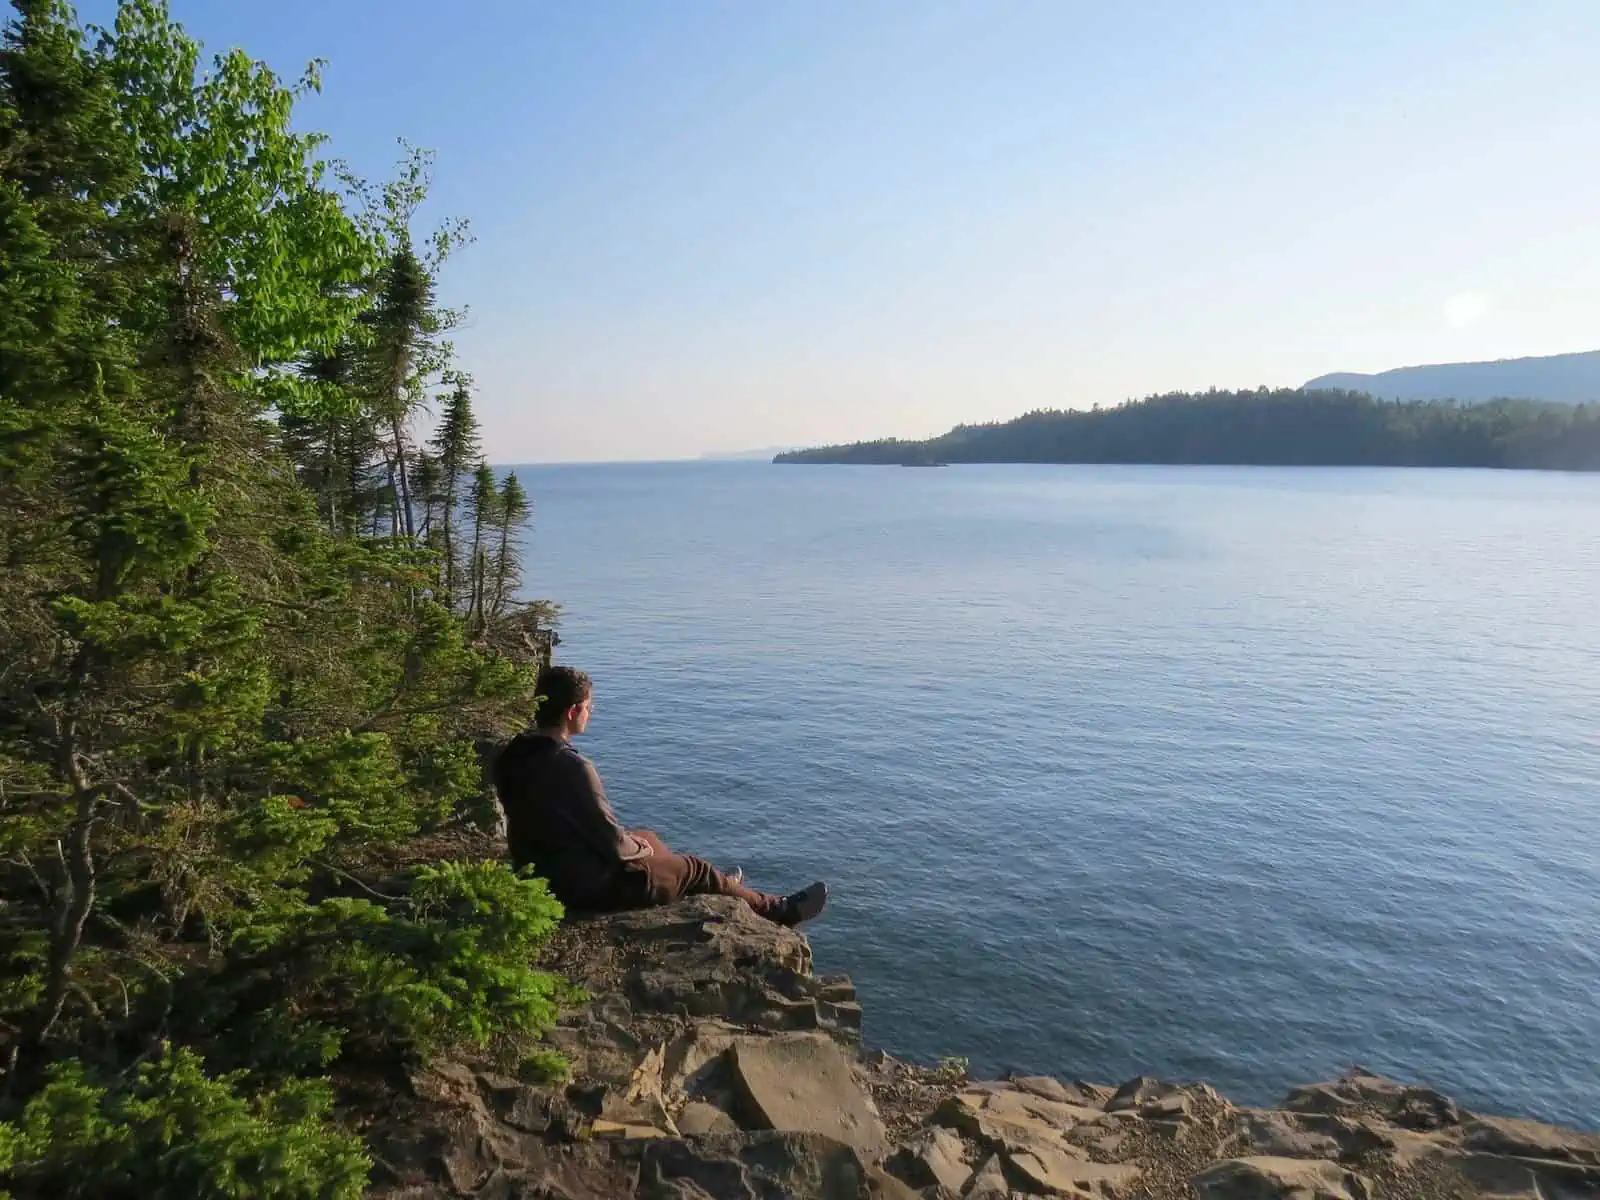 A man sitting on a rock with trees behind him overlooking Thunder Bay, Ontario, Canada